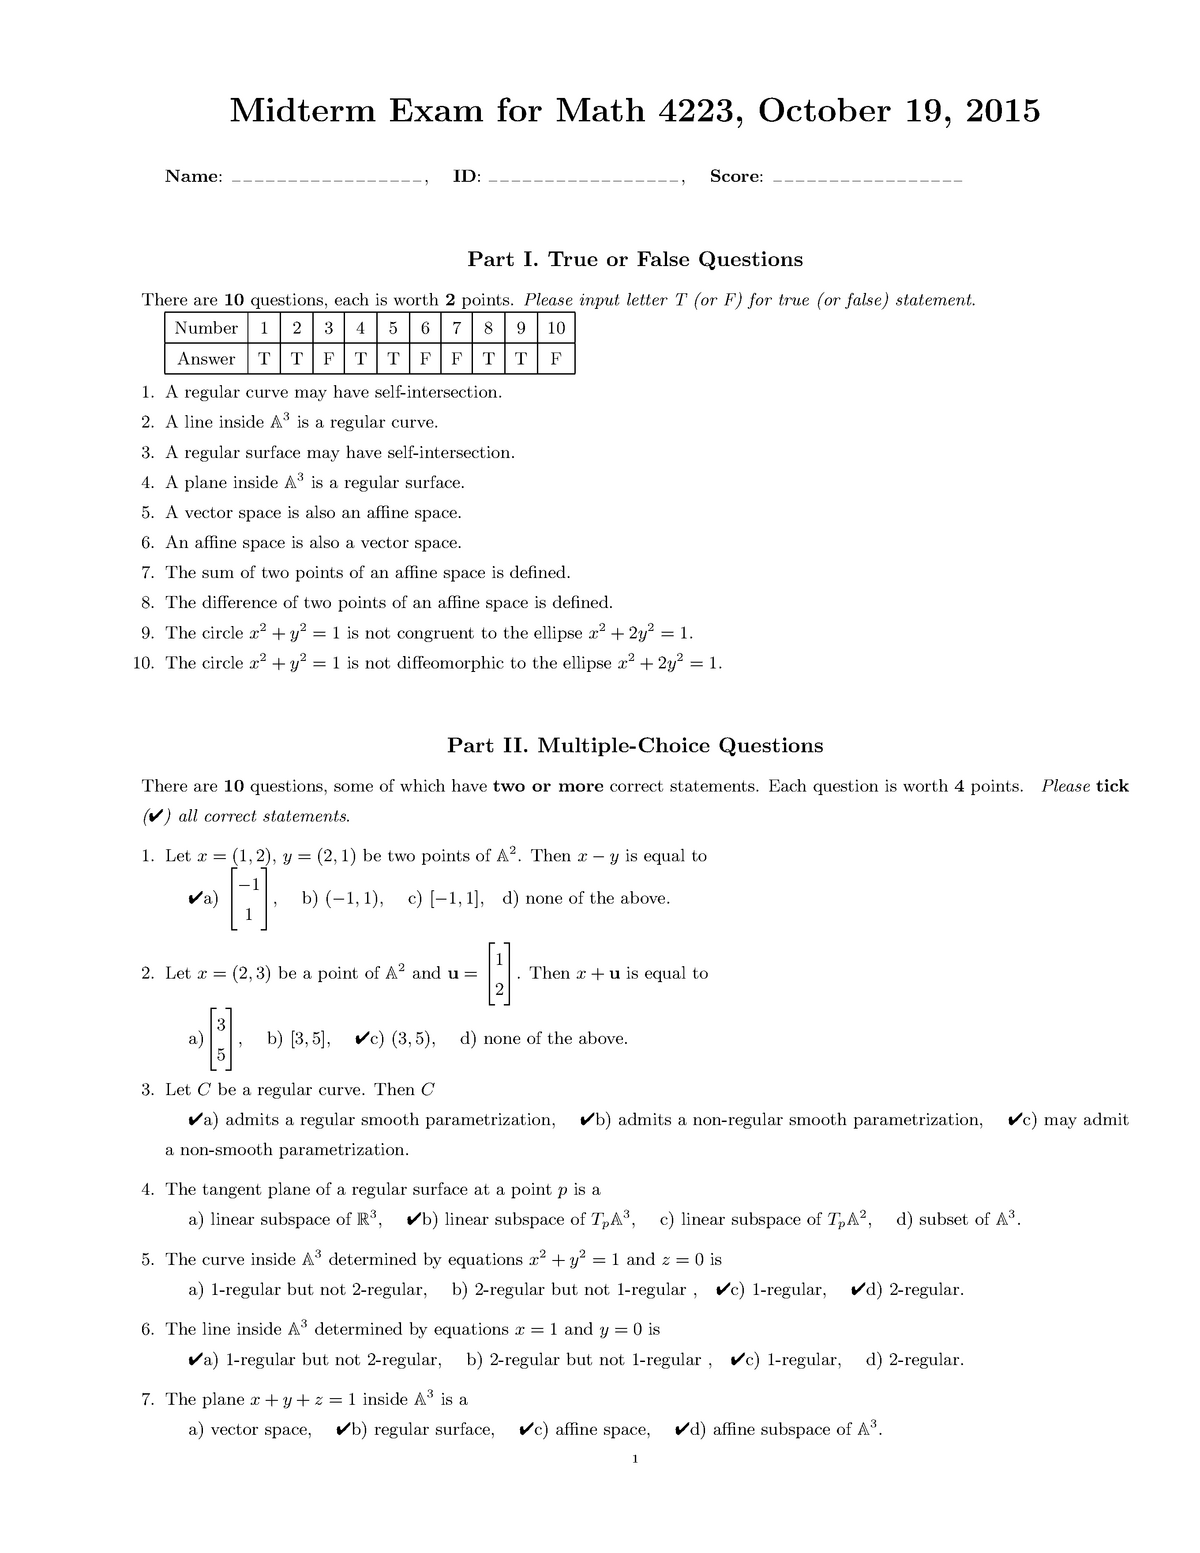 midterm-exam-2015-questions-and-answers-midterm-exam-for-math-4223